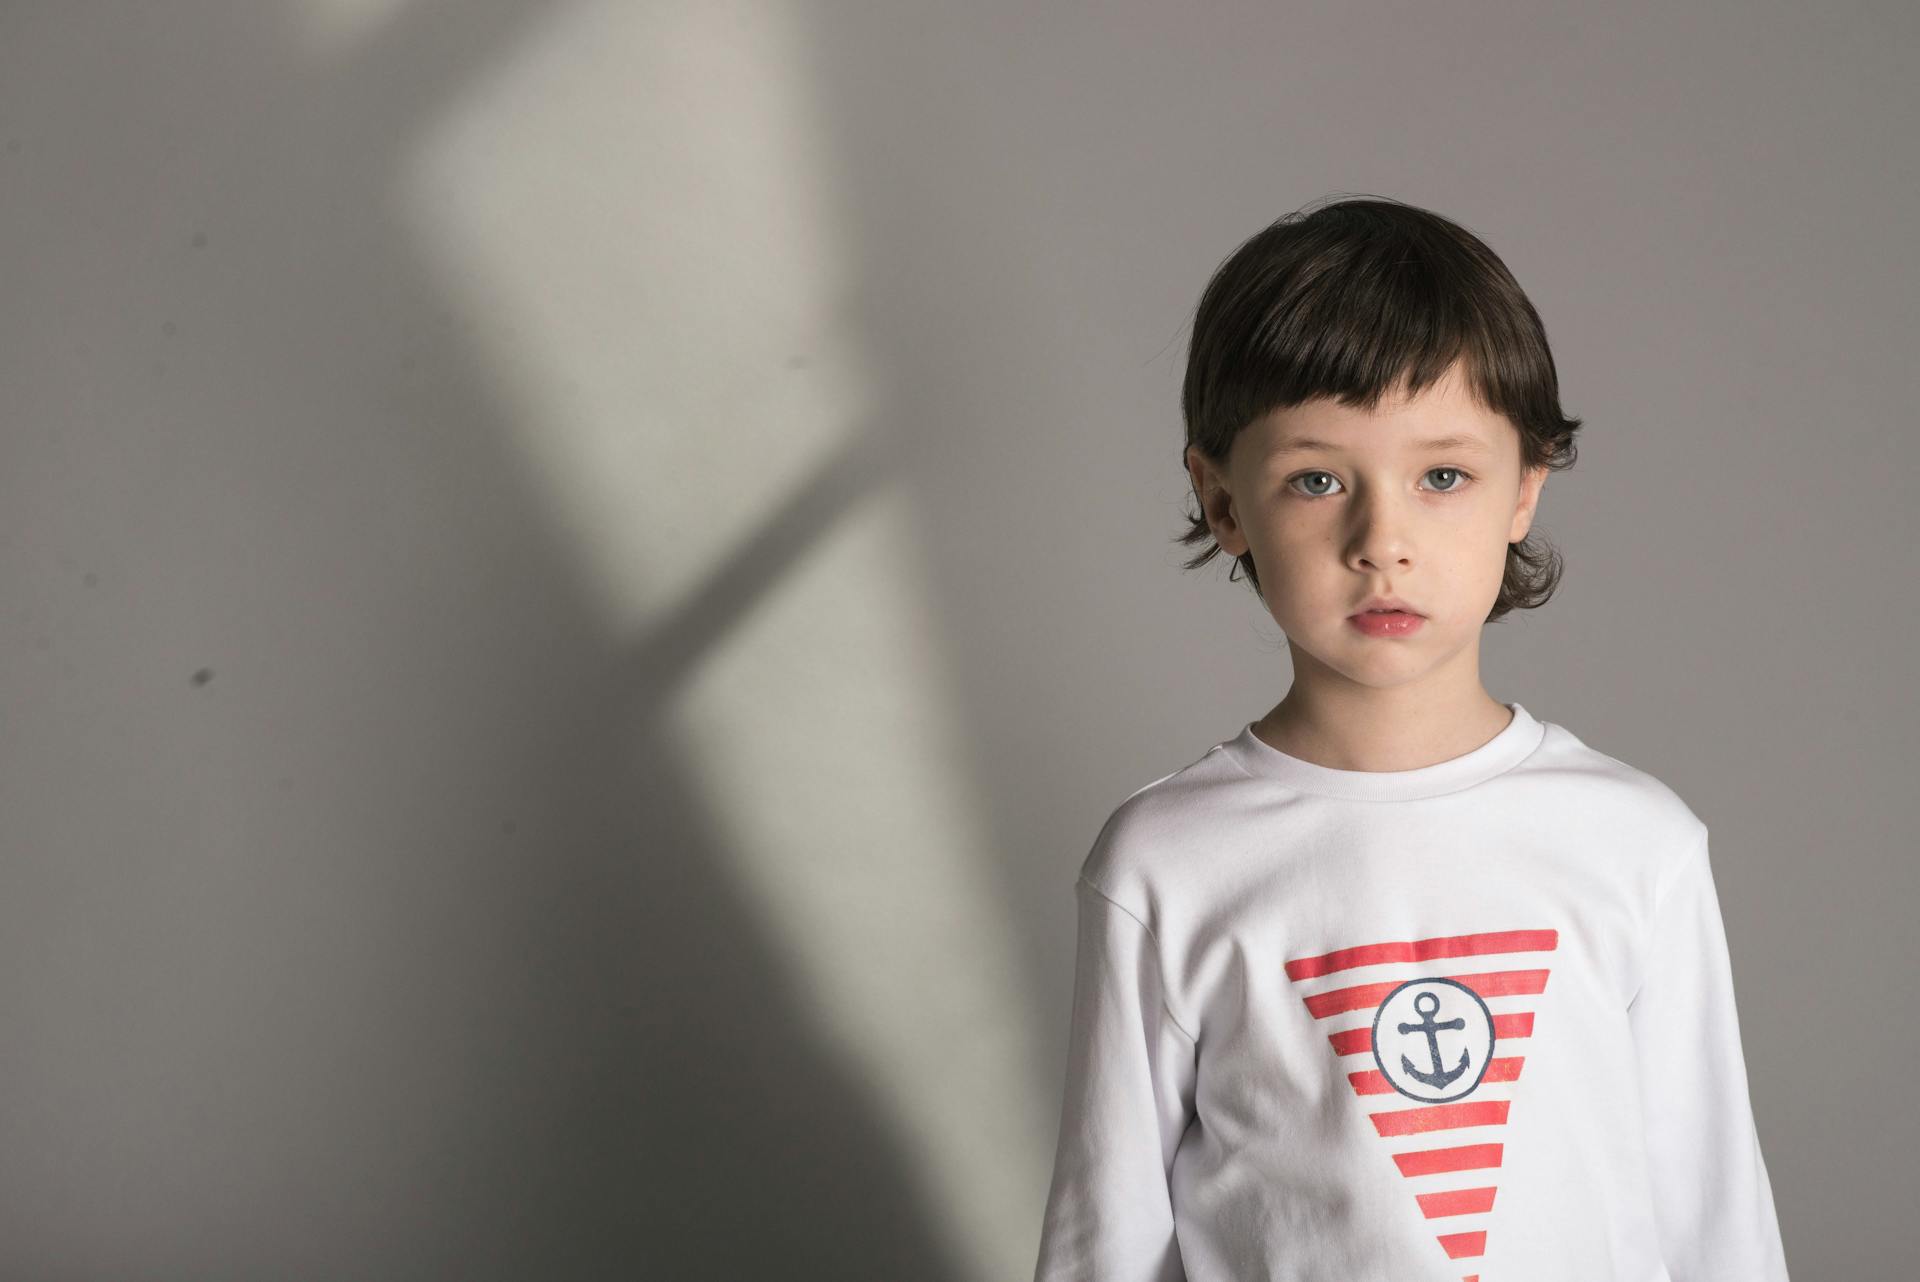 A little boy wearing a full sleeves white shirt | Source: Pexels